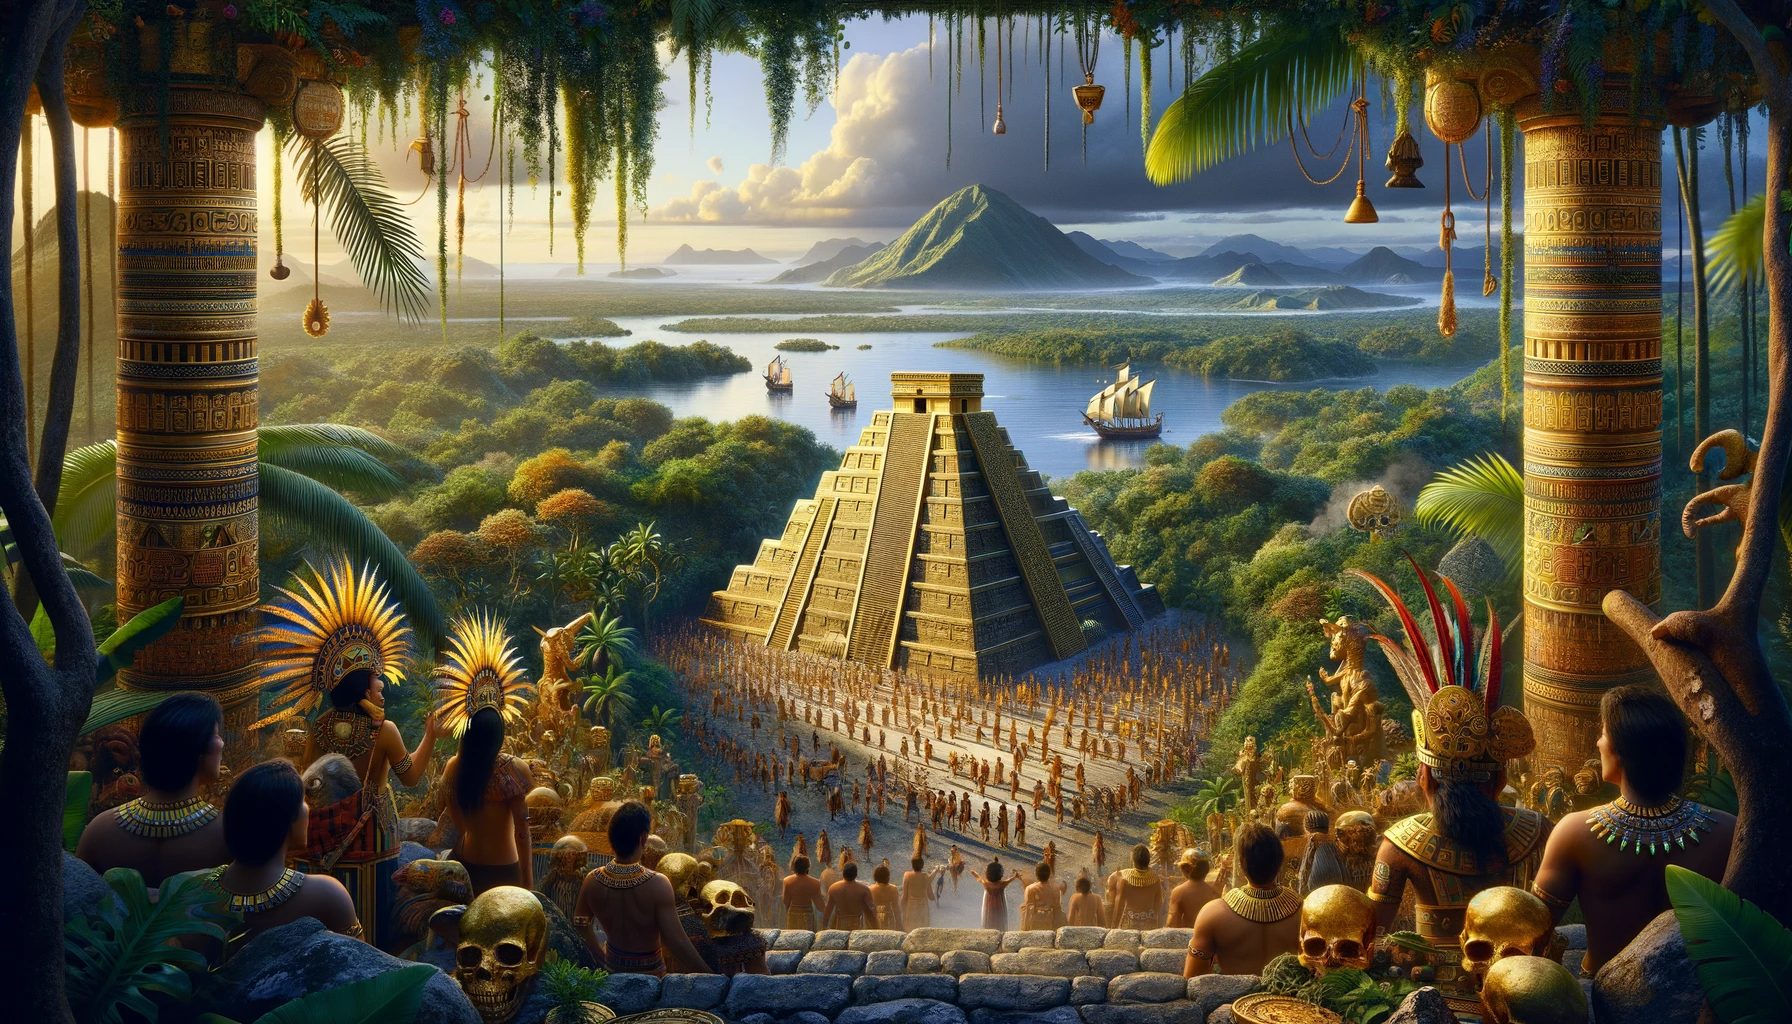 Ancient Mesoamerican civilization with pyramid and ritual ceremony.